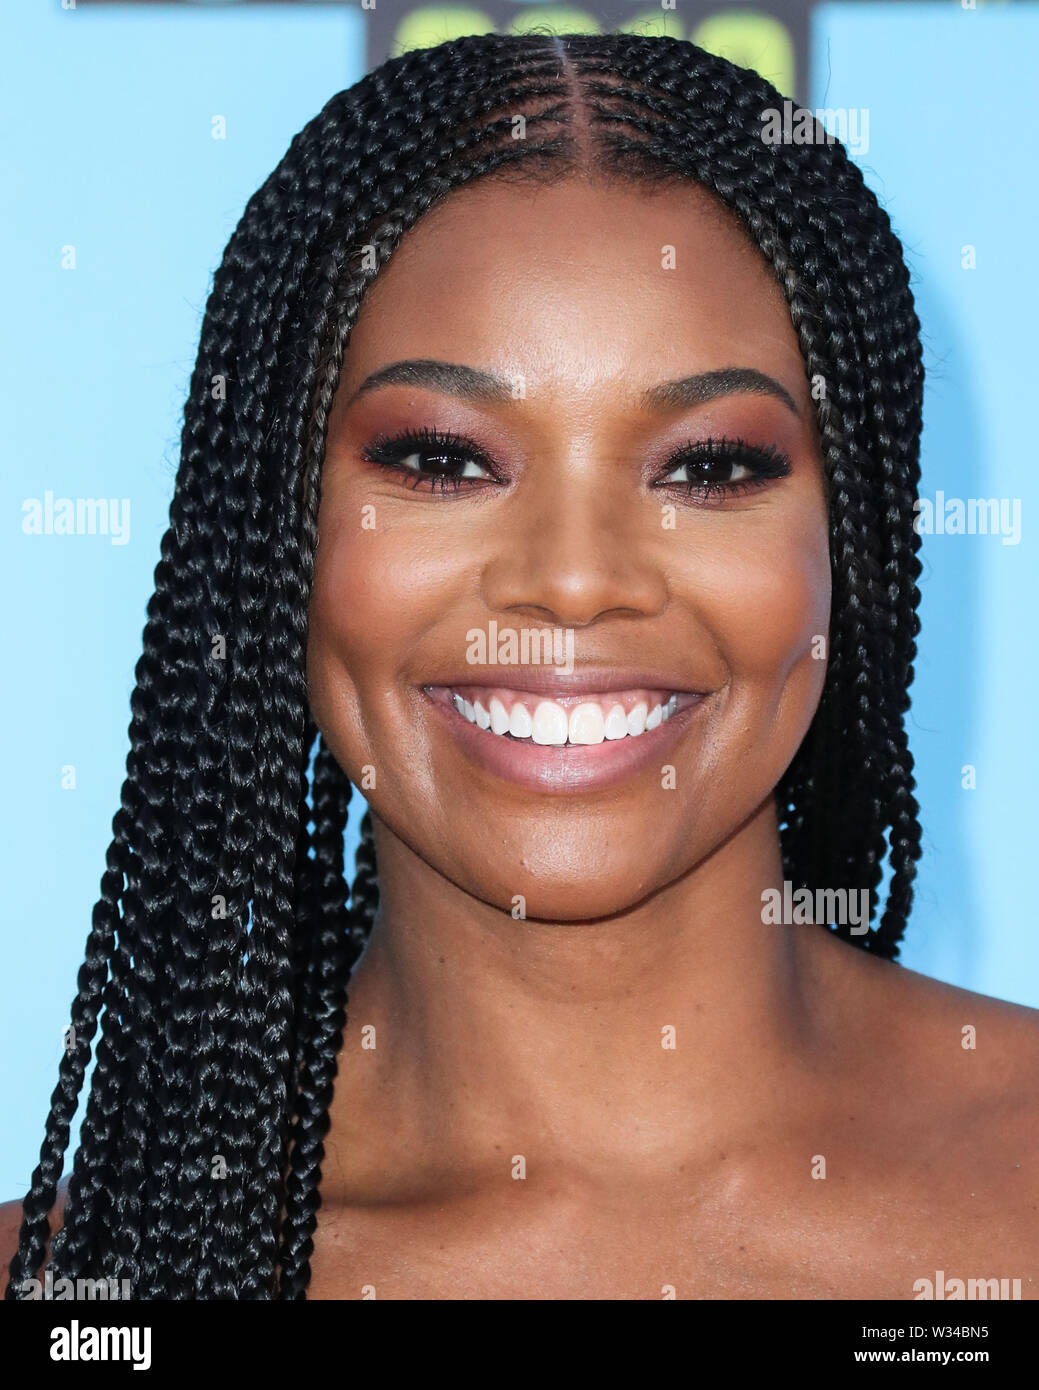 Santa Monica, United States. 11th July, 2019. SANTA MONICA, LOS ANGELES, CALIFORNIA, USA - JULY 11: Actress Gabrielle Union wearing Antonio Berardi arrives at the Nickelodeon Kids' Choice Sports 2019 held at Barker Hangar on July 11, 2019 in Santa Monica, Los Angeles, California, United States. (Photo by Xavier Collin/Image Press Agency) Credit: Image Press Agency/Alamy Live News Stock Photo